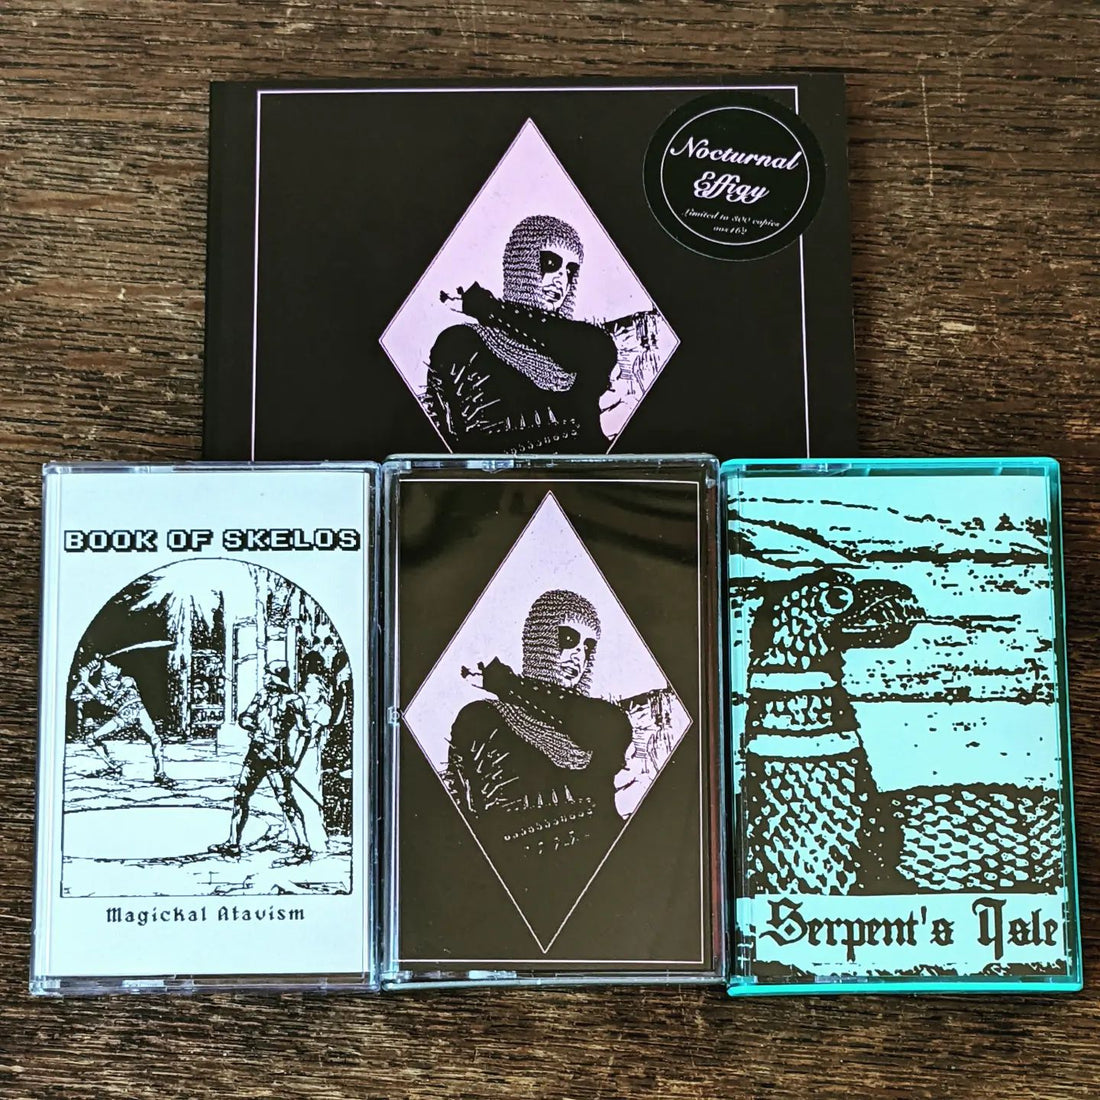 NOCTURNAL EFFIGY CD/Tape demos collection.